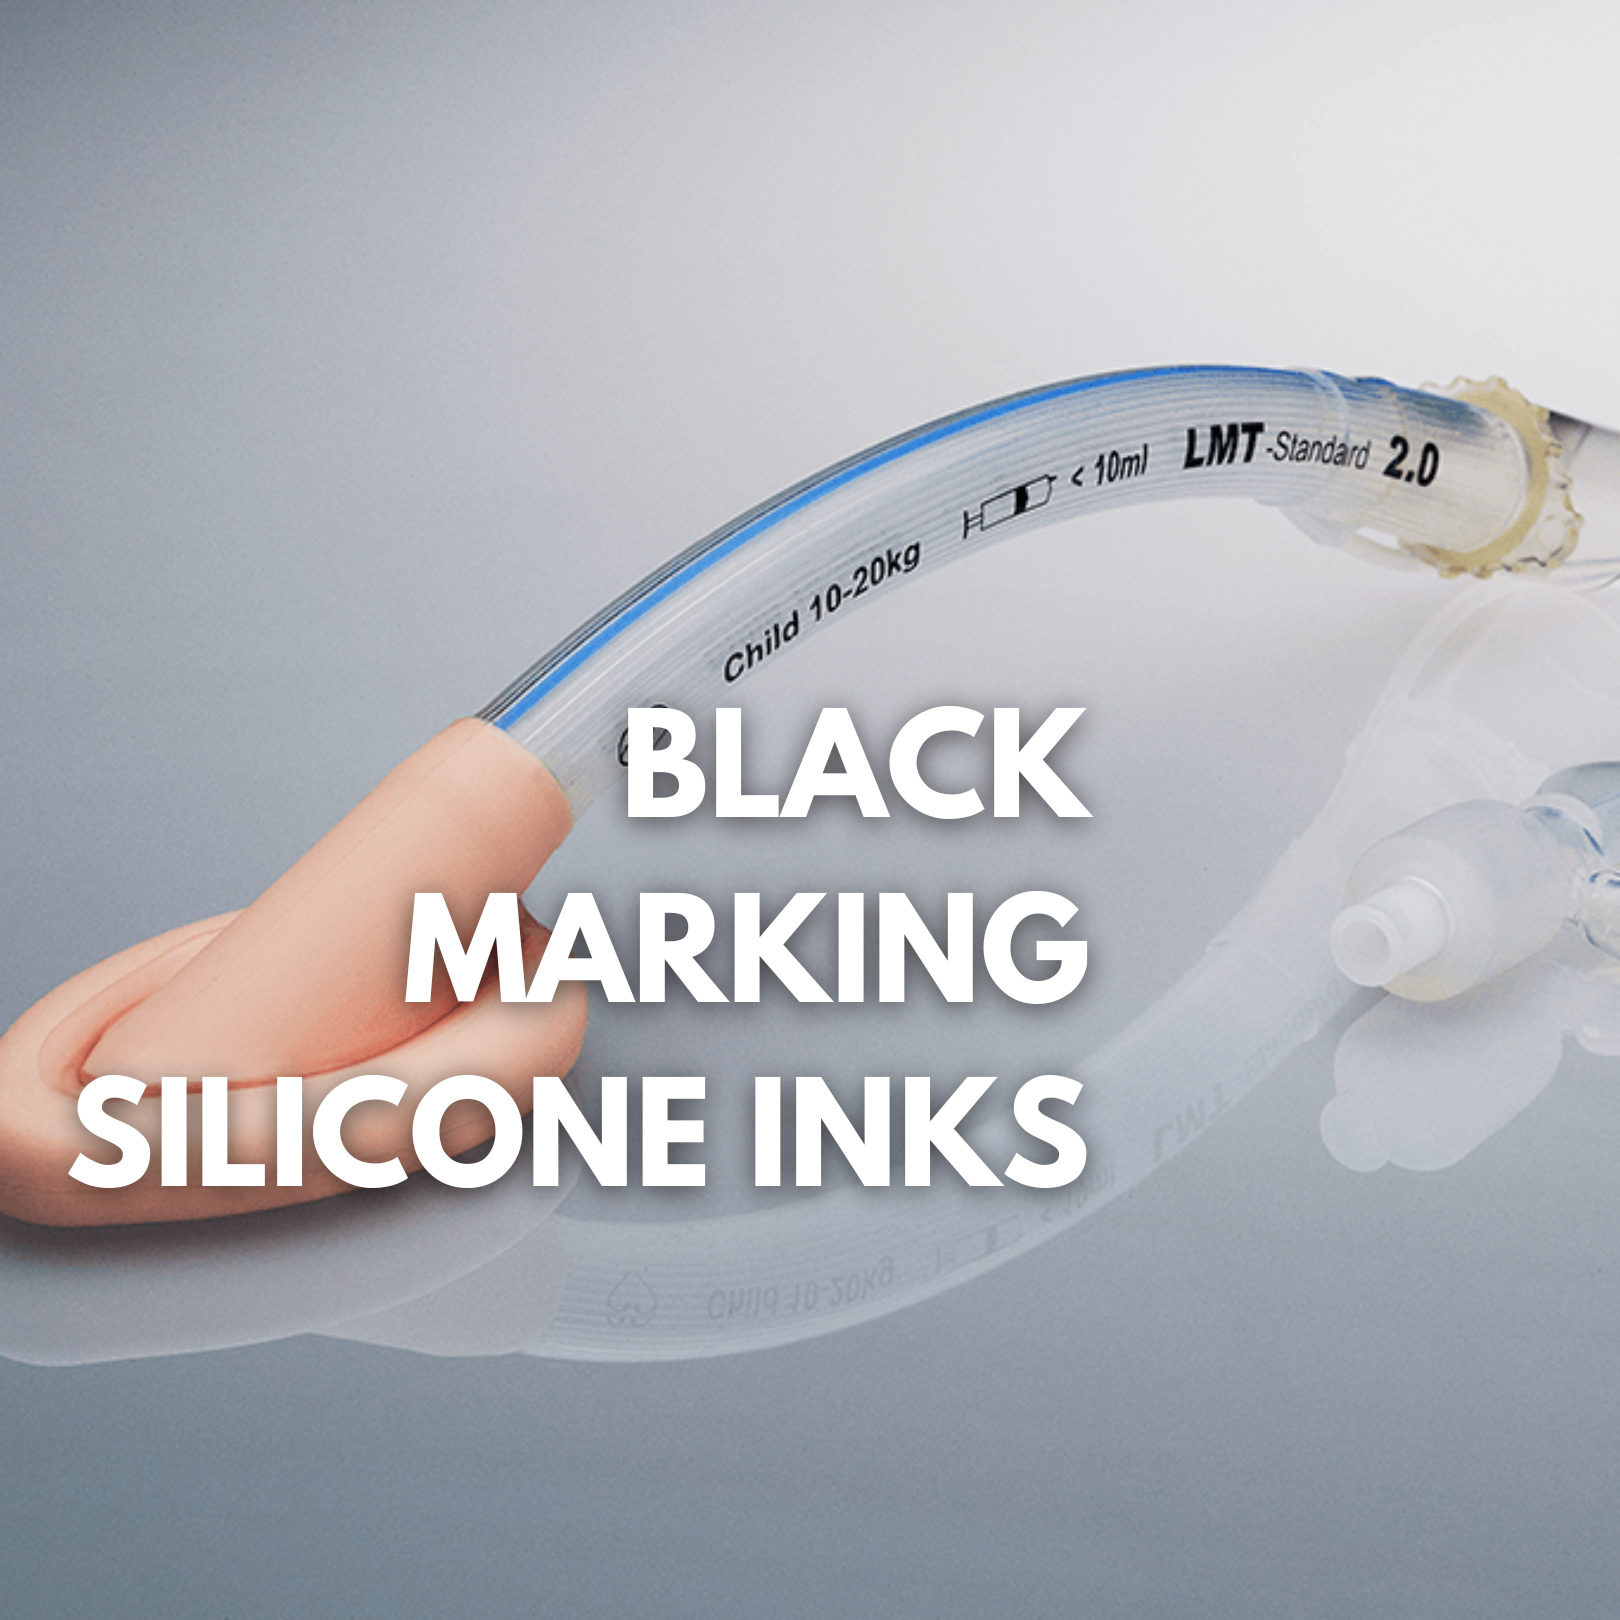 Silicone Marking ink